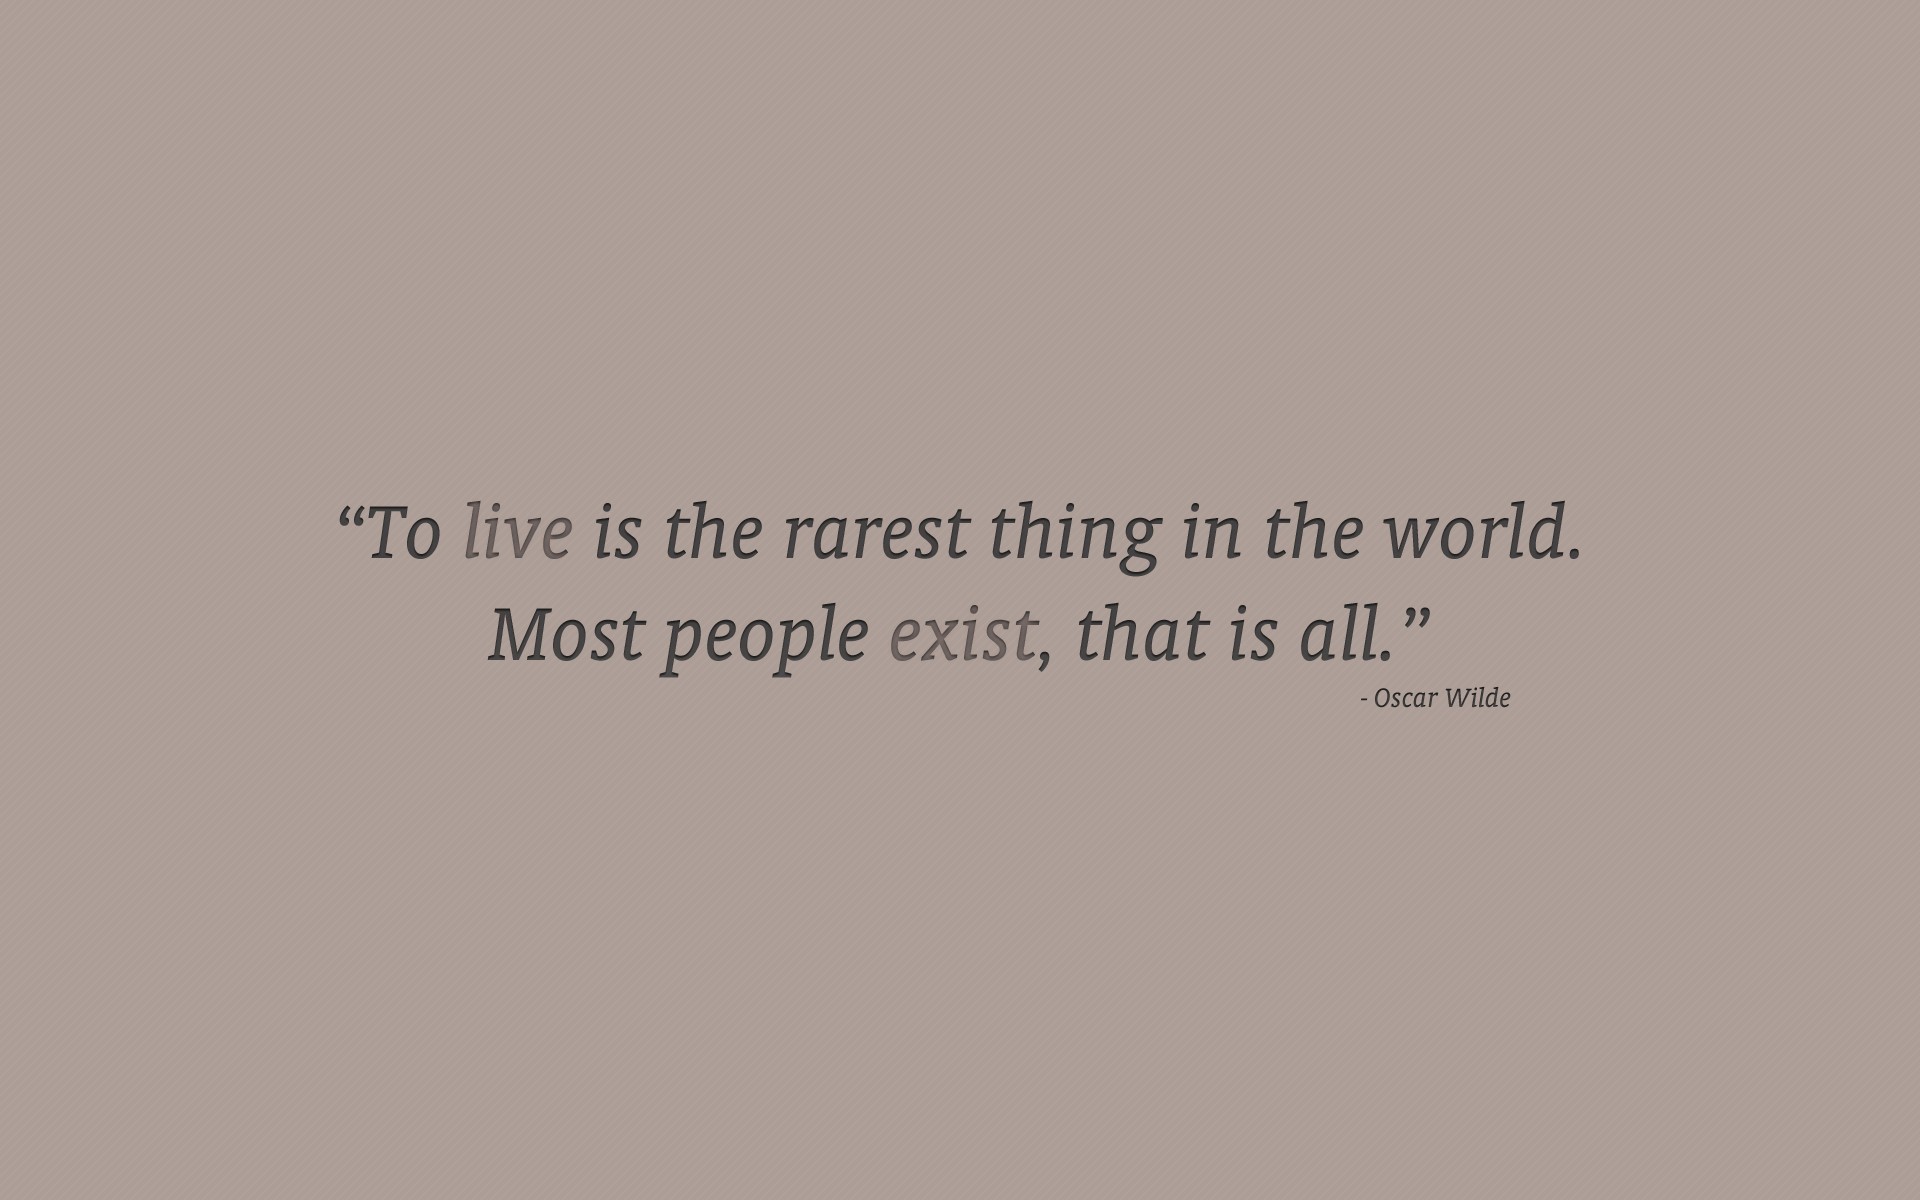 To live is the rarest thing in the world.